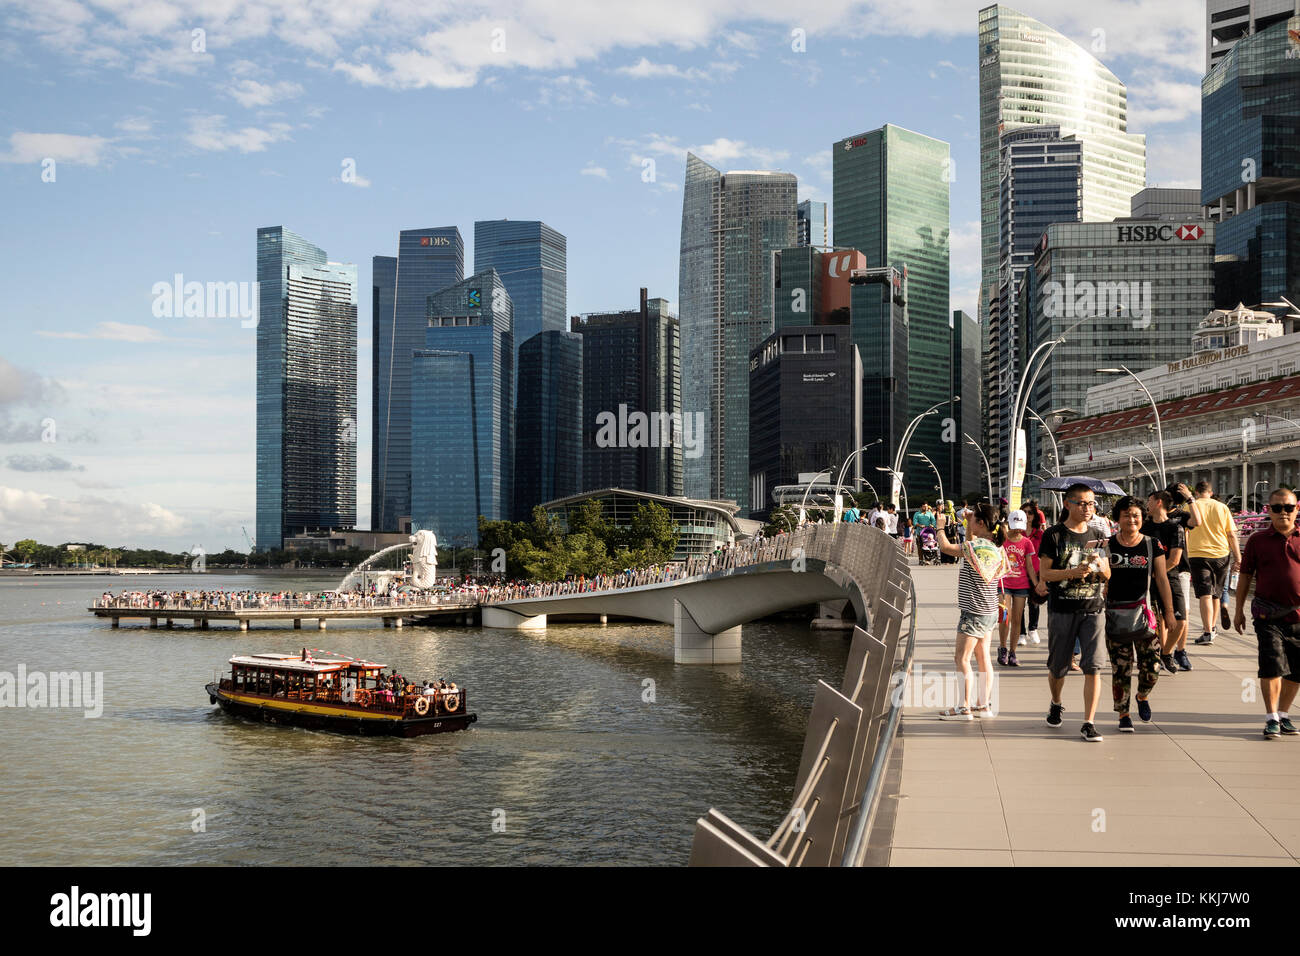 The quayside at Marina Bay, mouth of the Singapore River in Singapore Stock Photo